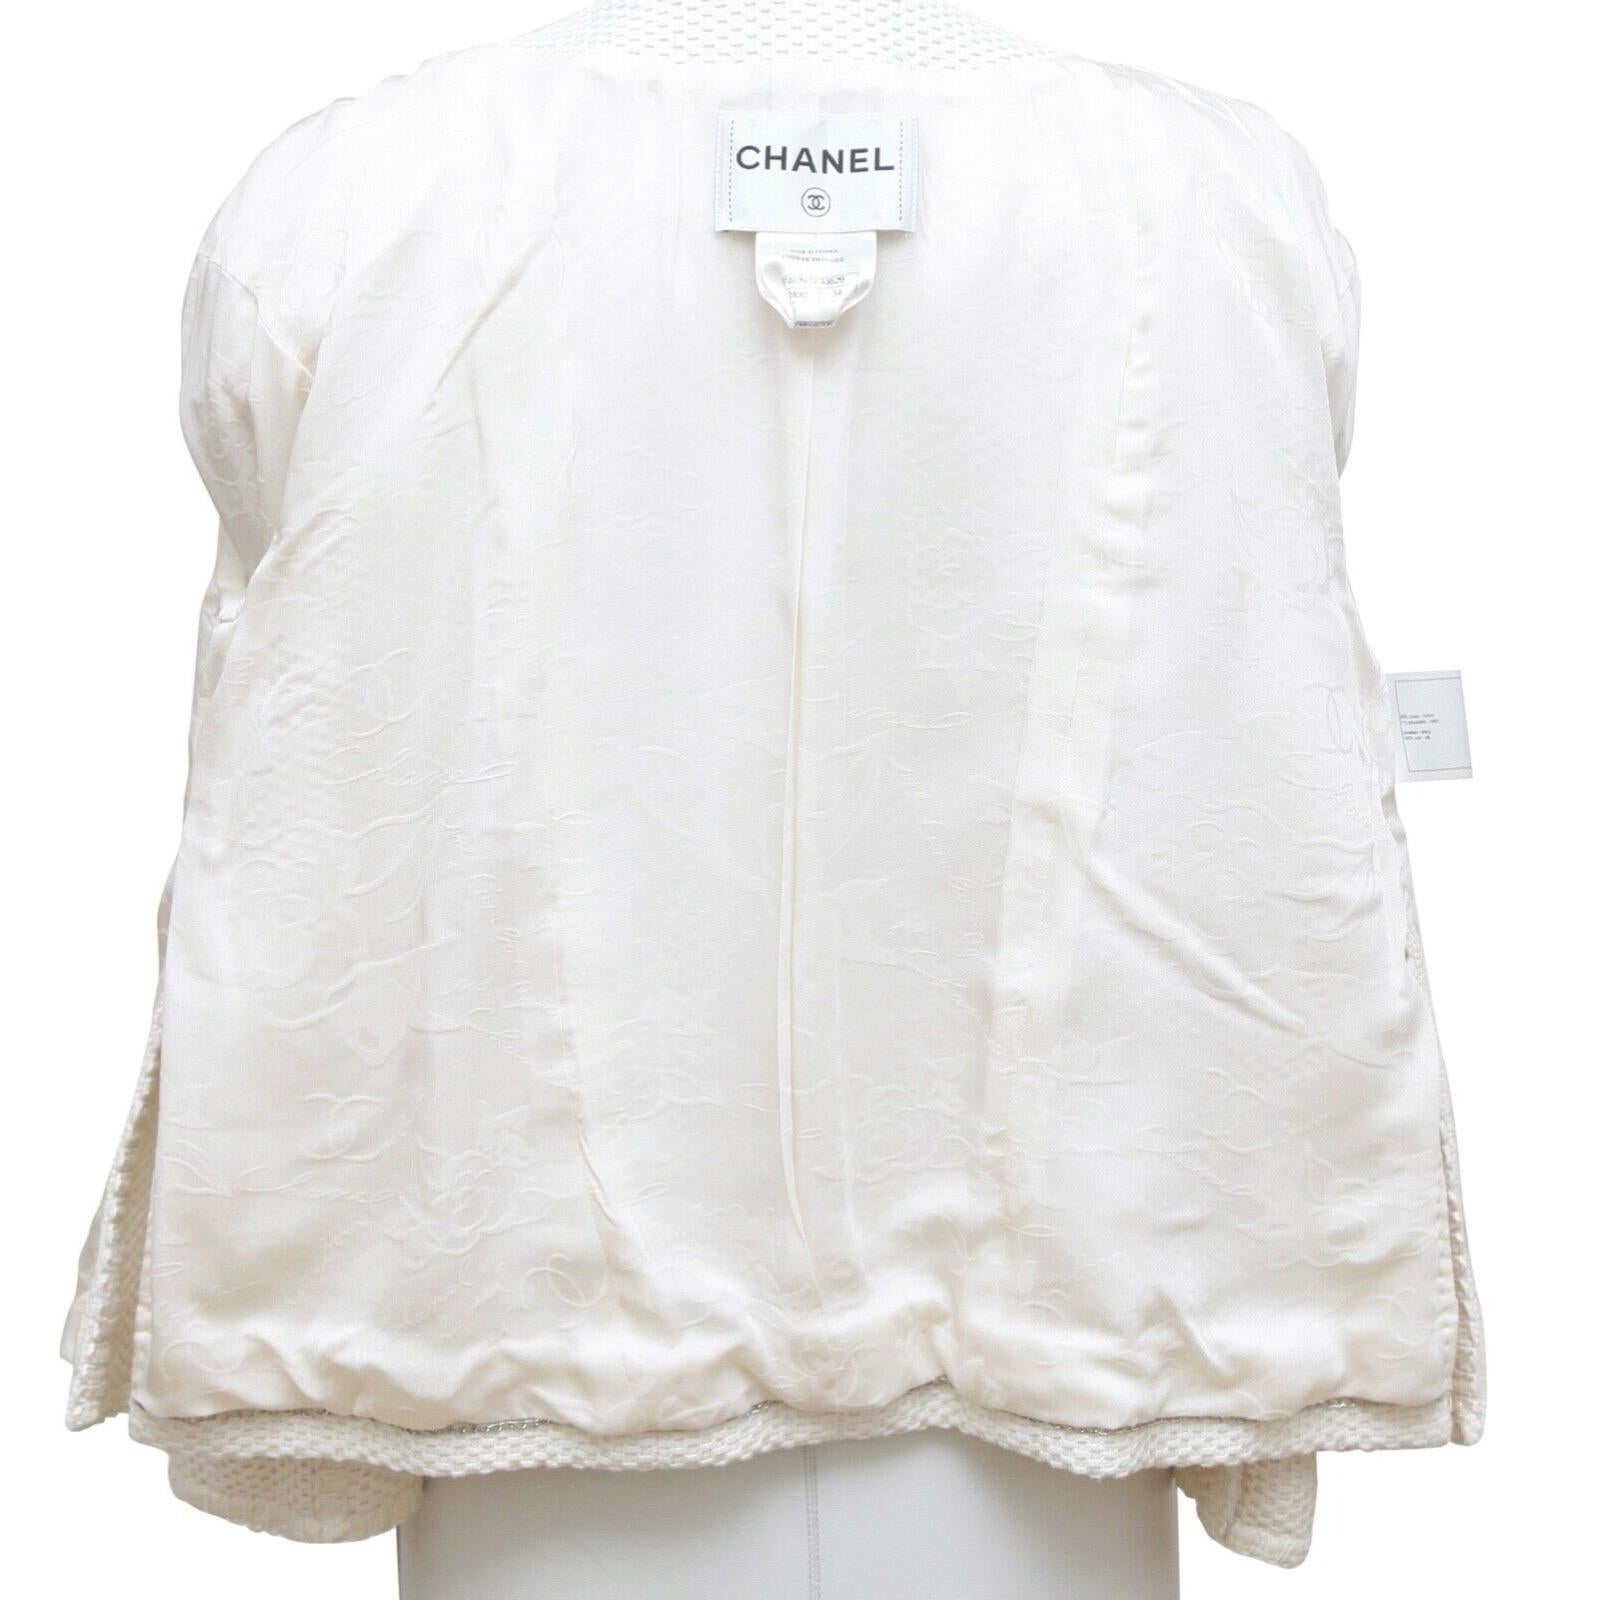 CHANEL Tweed Jacket Coat White Pearl 3/4 Sleeve Double Breasted 2013 13S Sz 34 For Sale 4